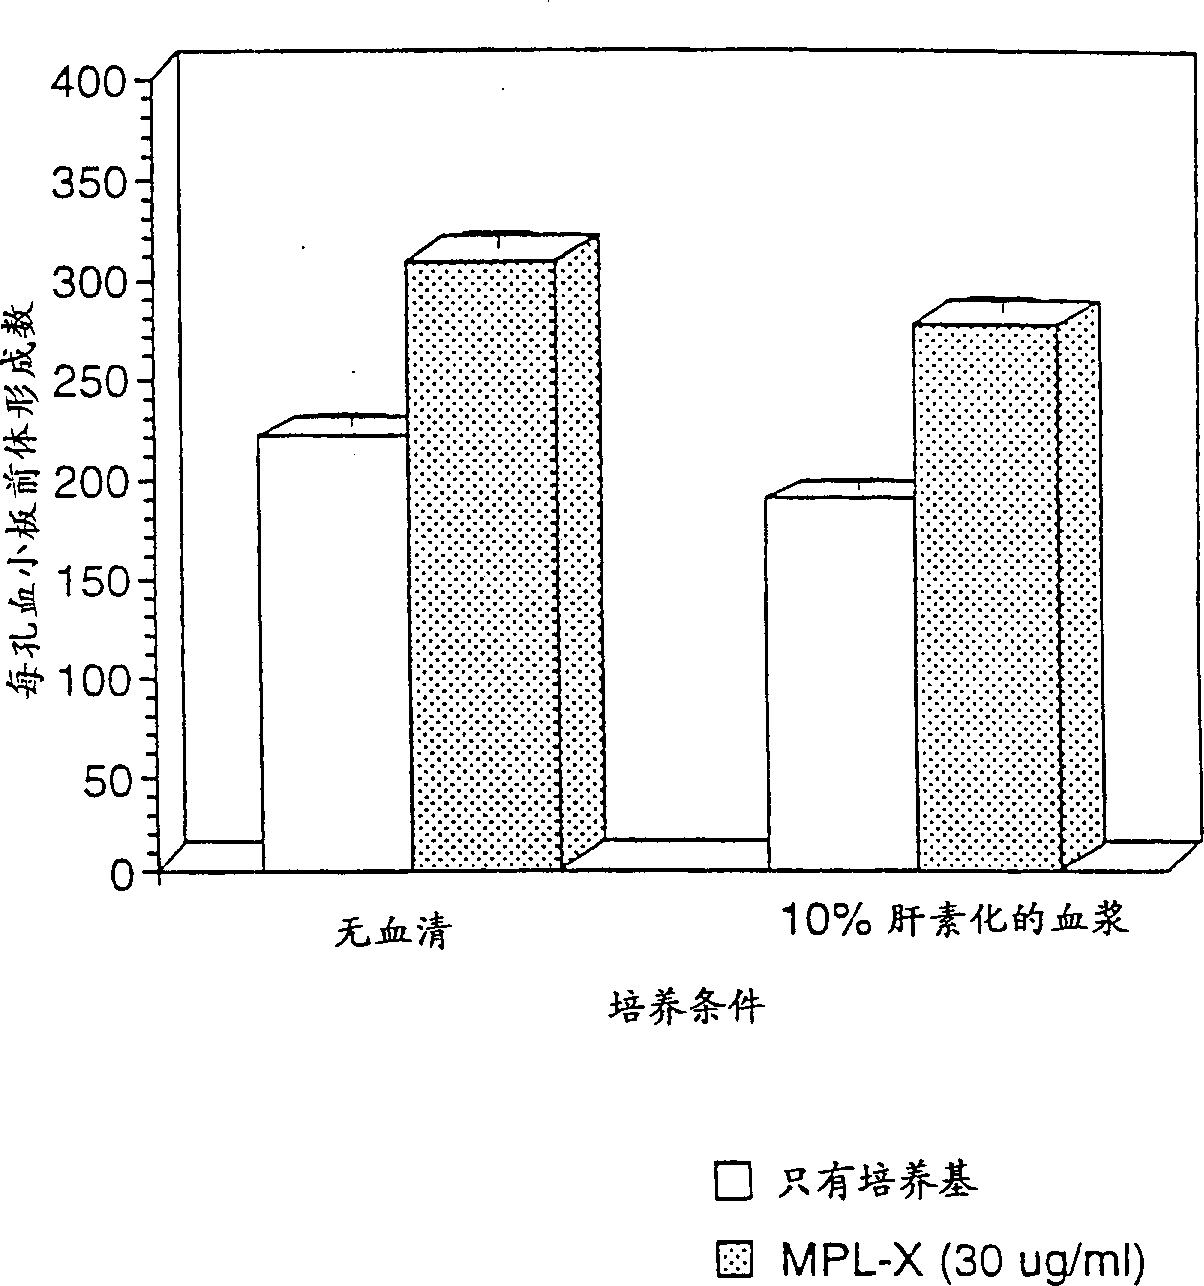 Compositions and methods using unbound mpl receptor for stimulating platelet production